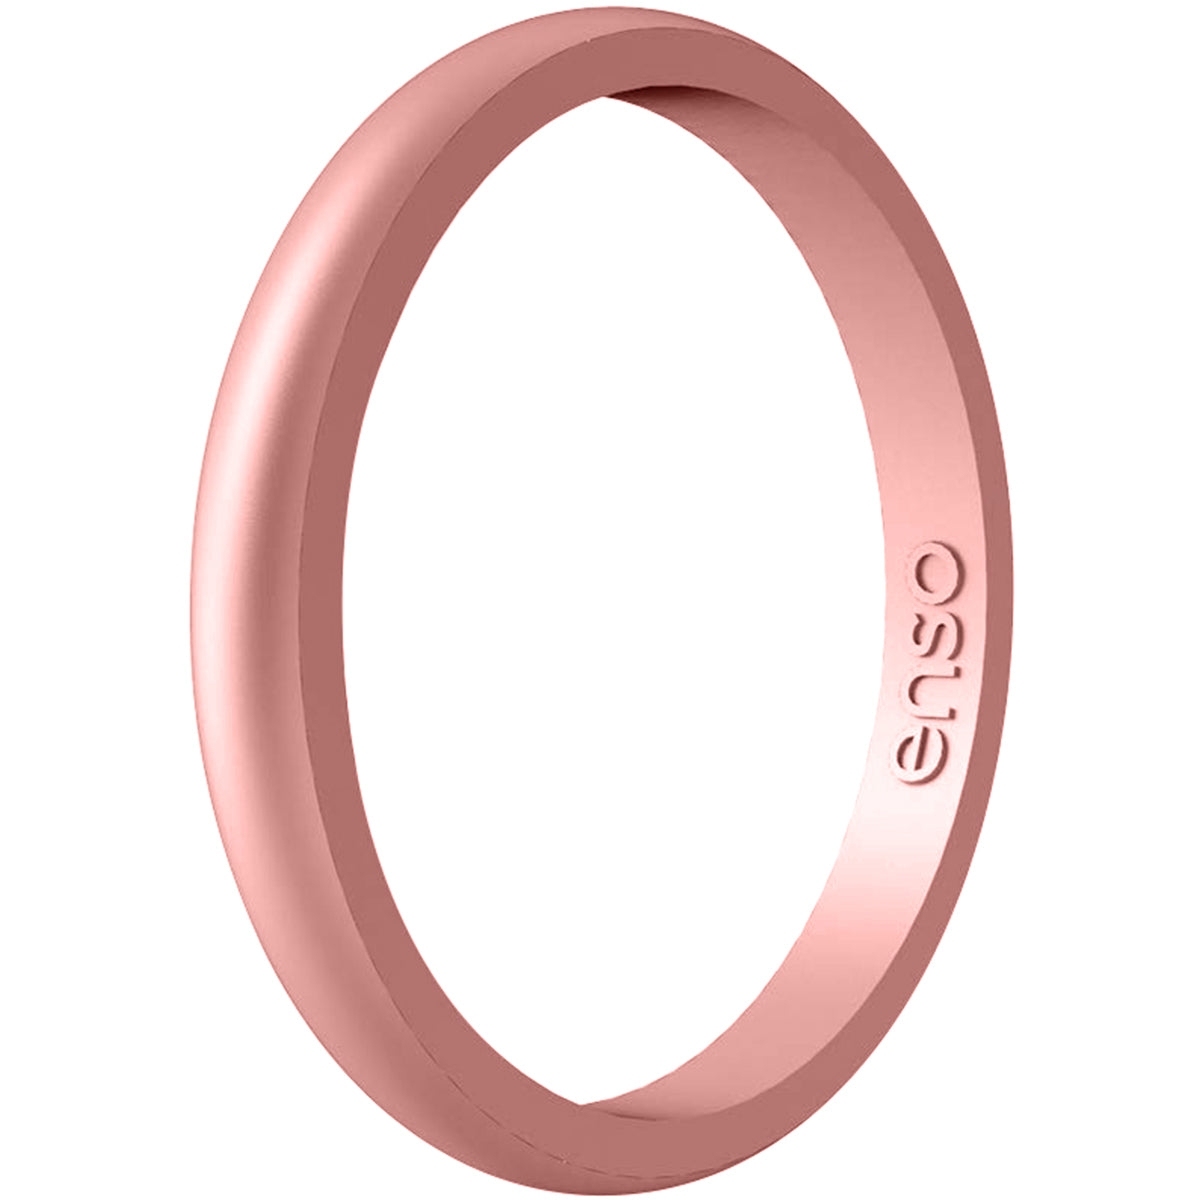 Enso Rings Halo Elements Series Silicone Ring - Rose Gold Enso Rings